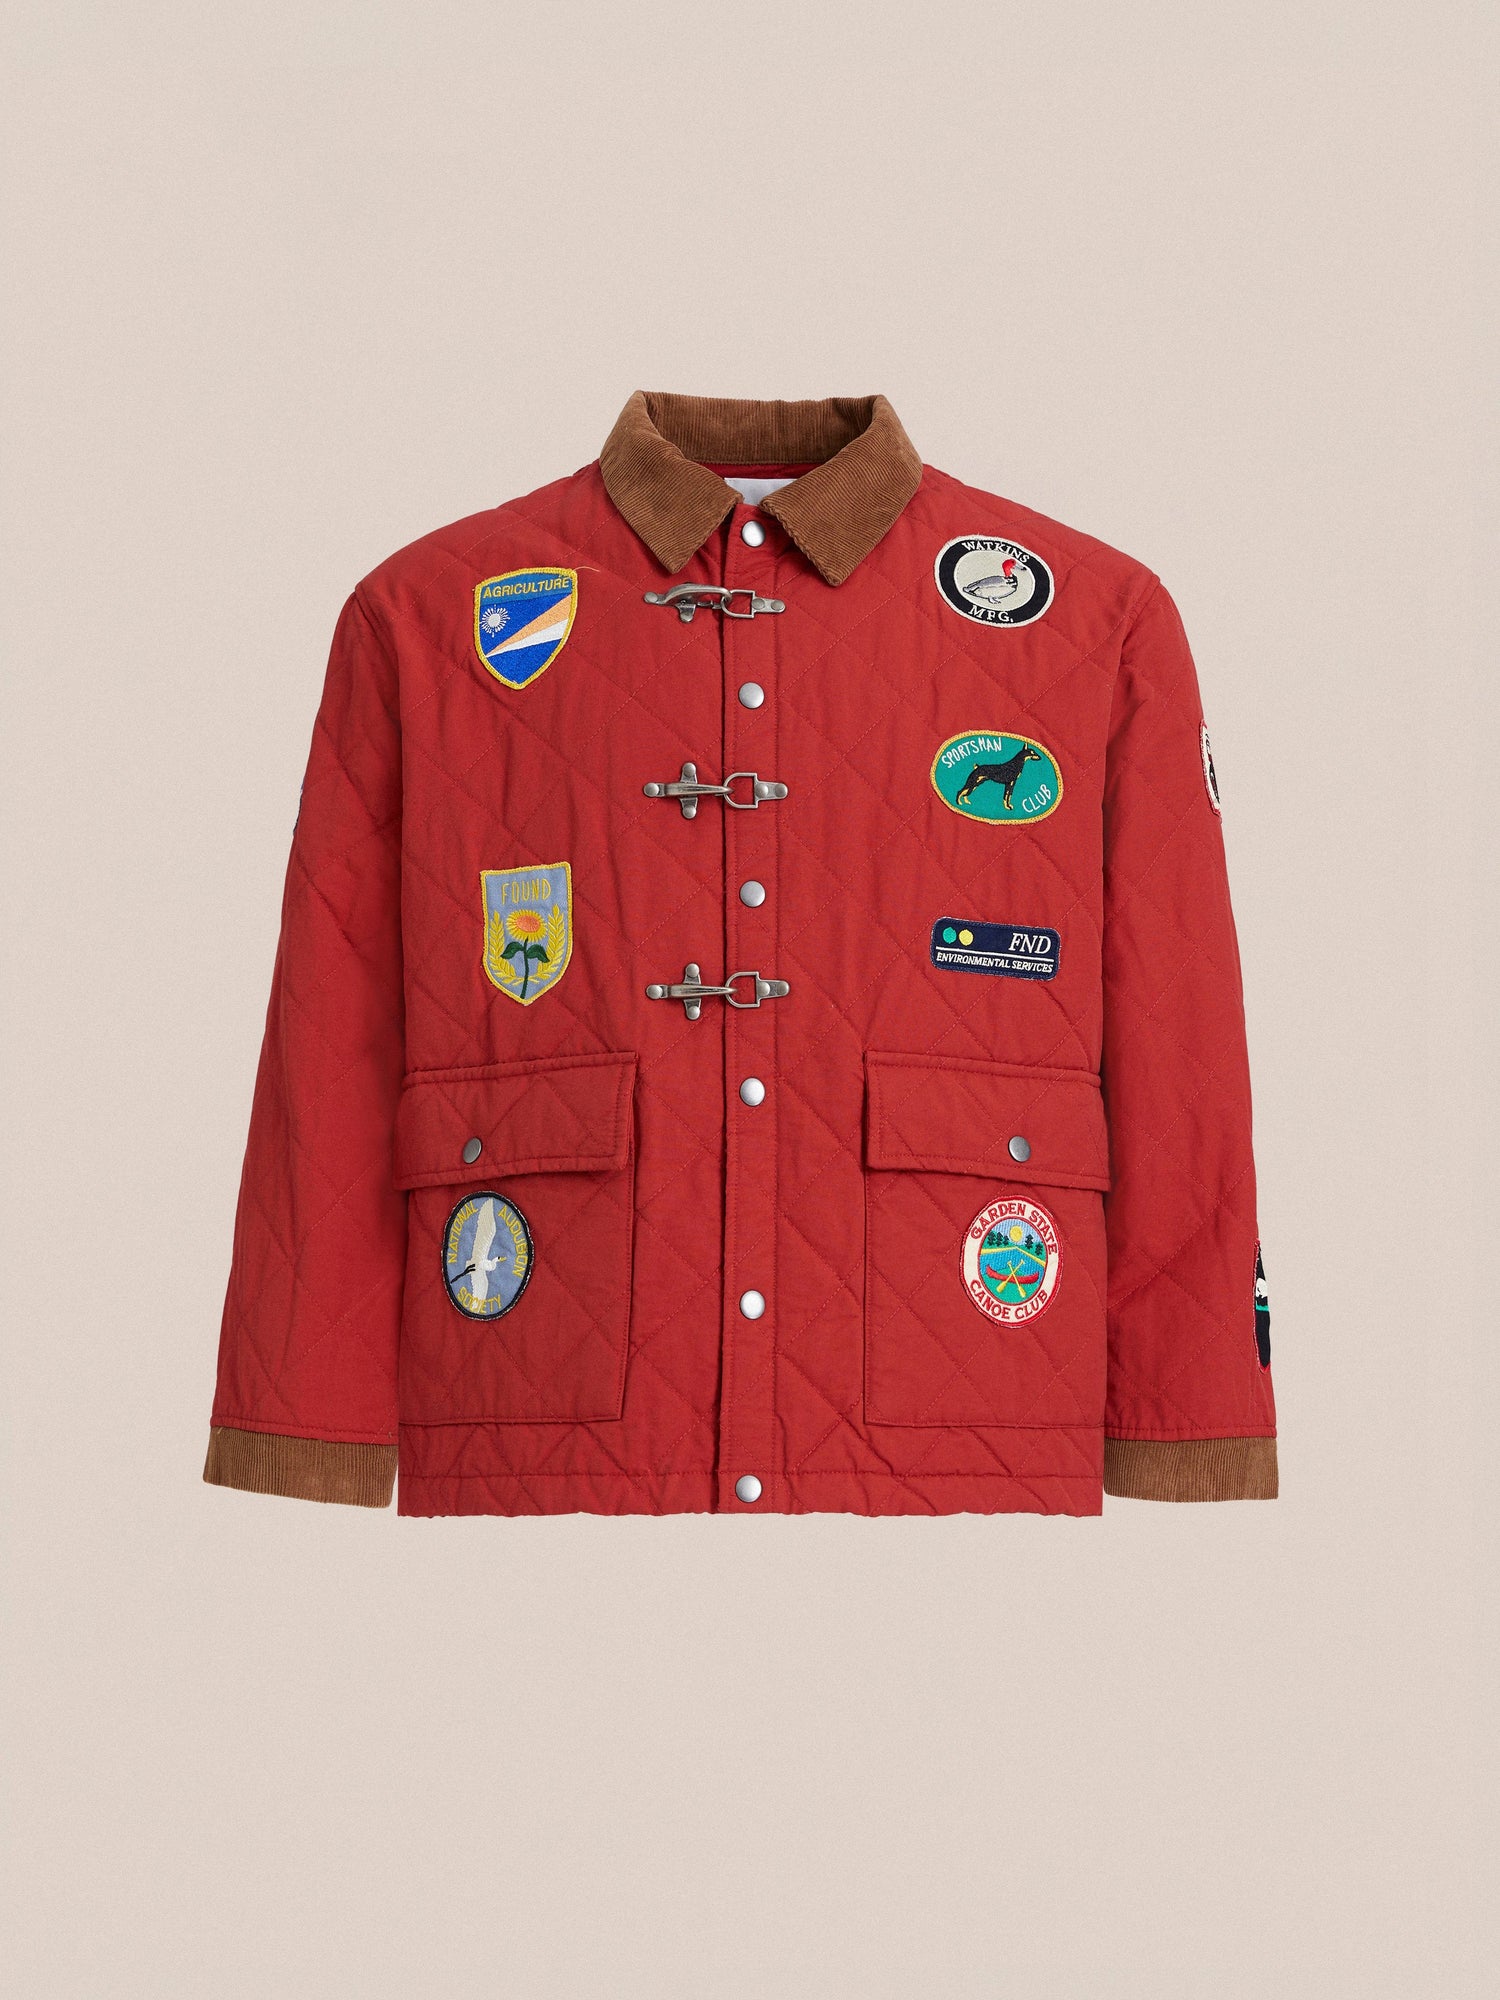 Found's Farmstead Quilt Patch Jacket features a red quilted design with a brown collar and antique silver fireman clasps. Adorned with various embroidered patches on the front, it also has two large front pockets for convenience.